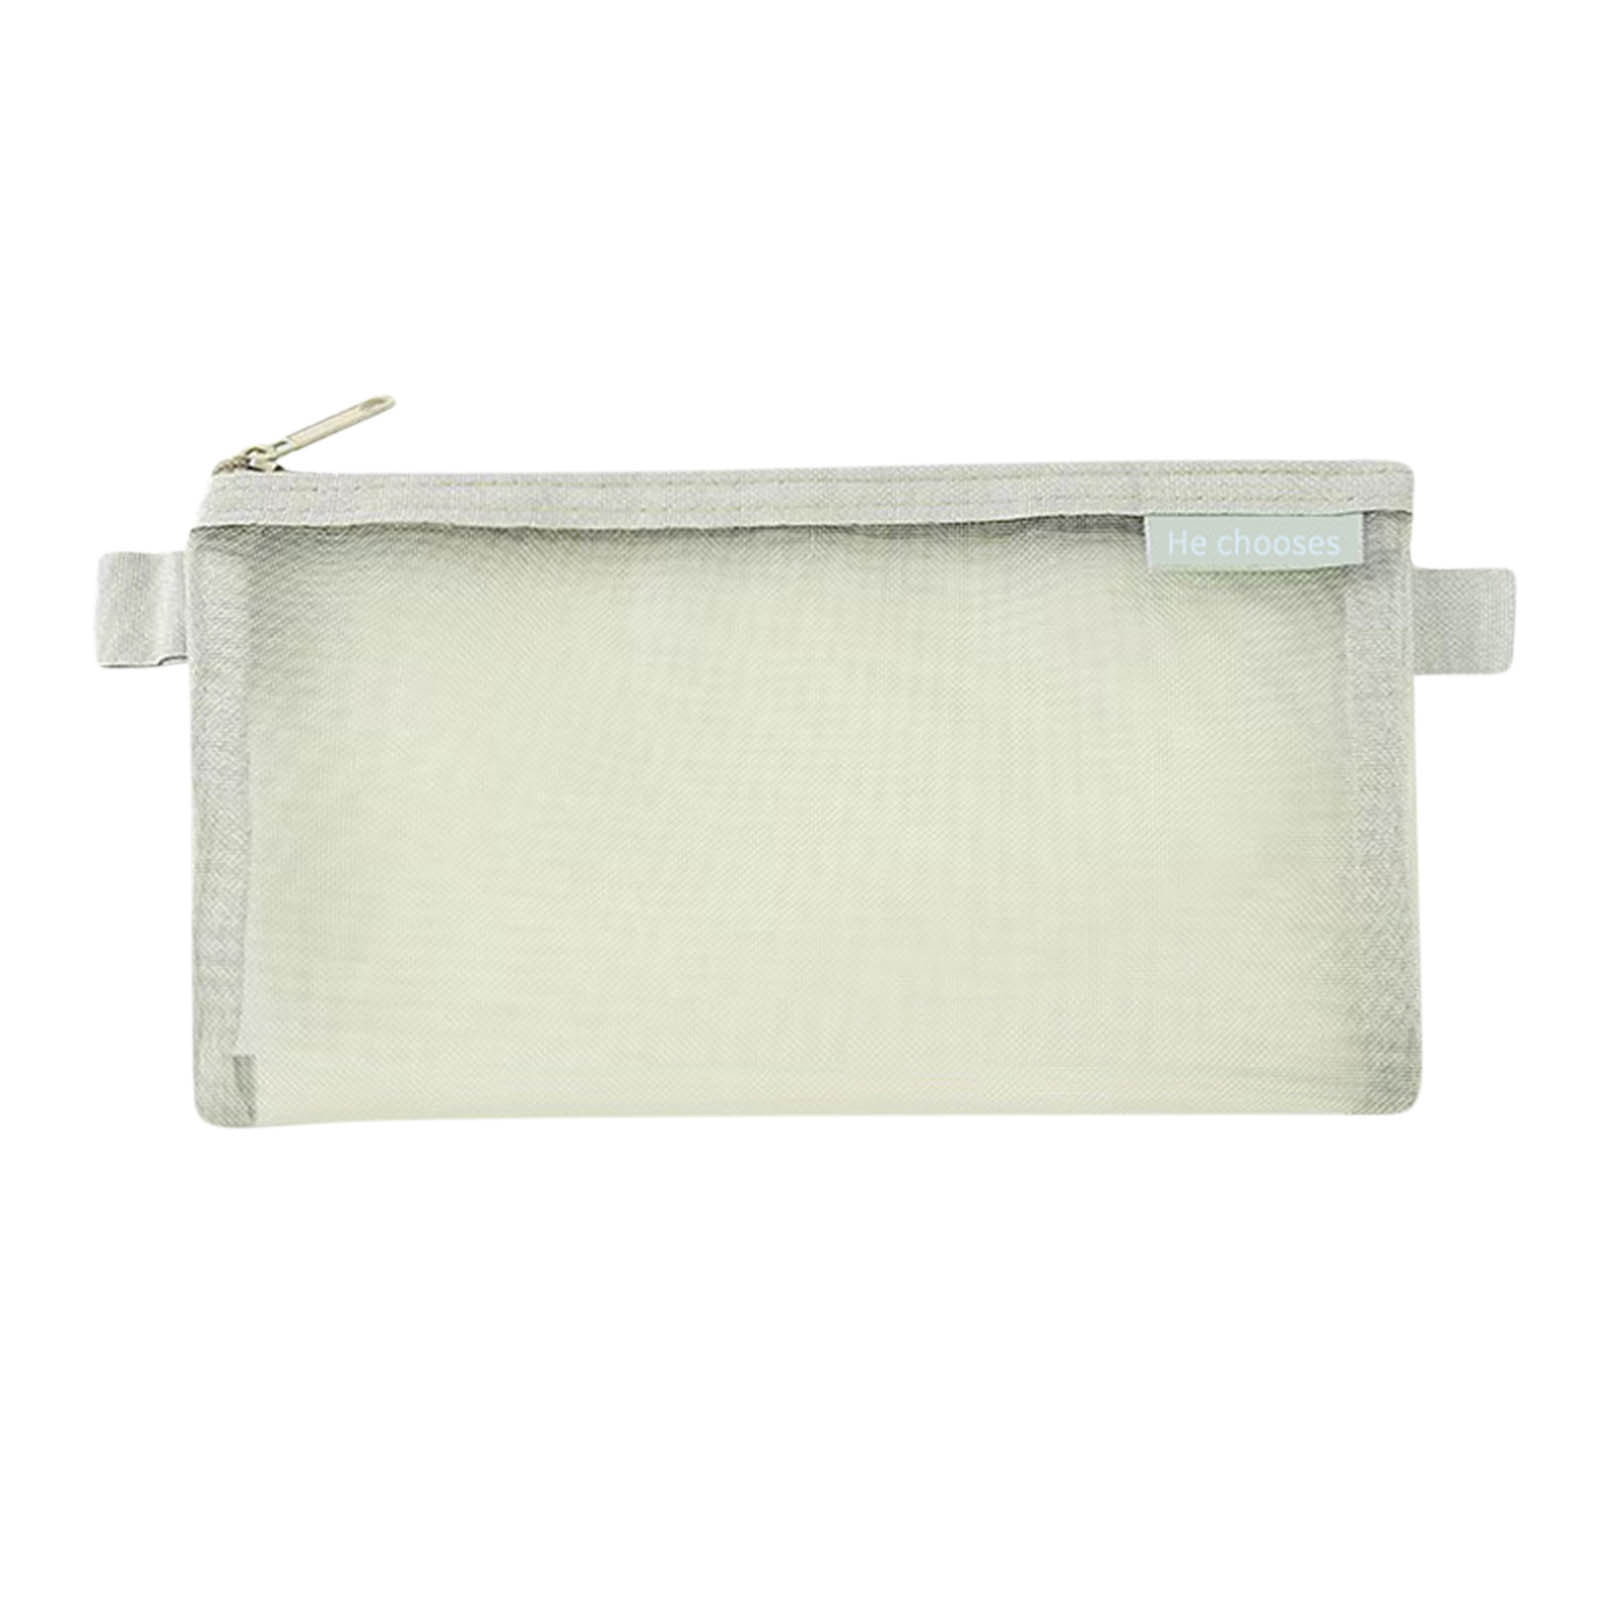 BAZIC 3 Ring Pencil Pouch, Mesh Window, Pastel Color, 6-Pack 